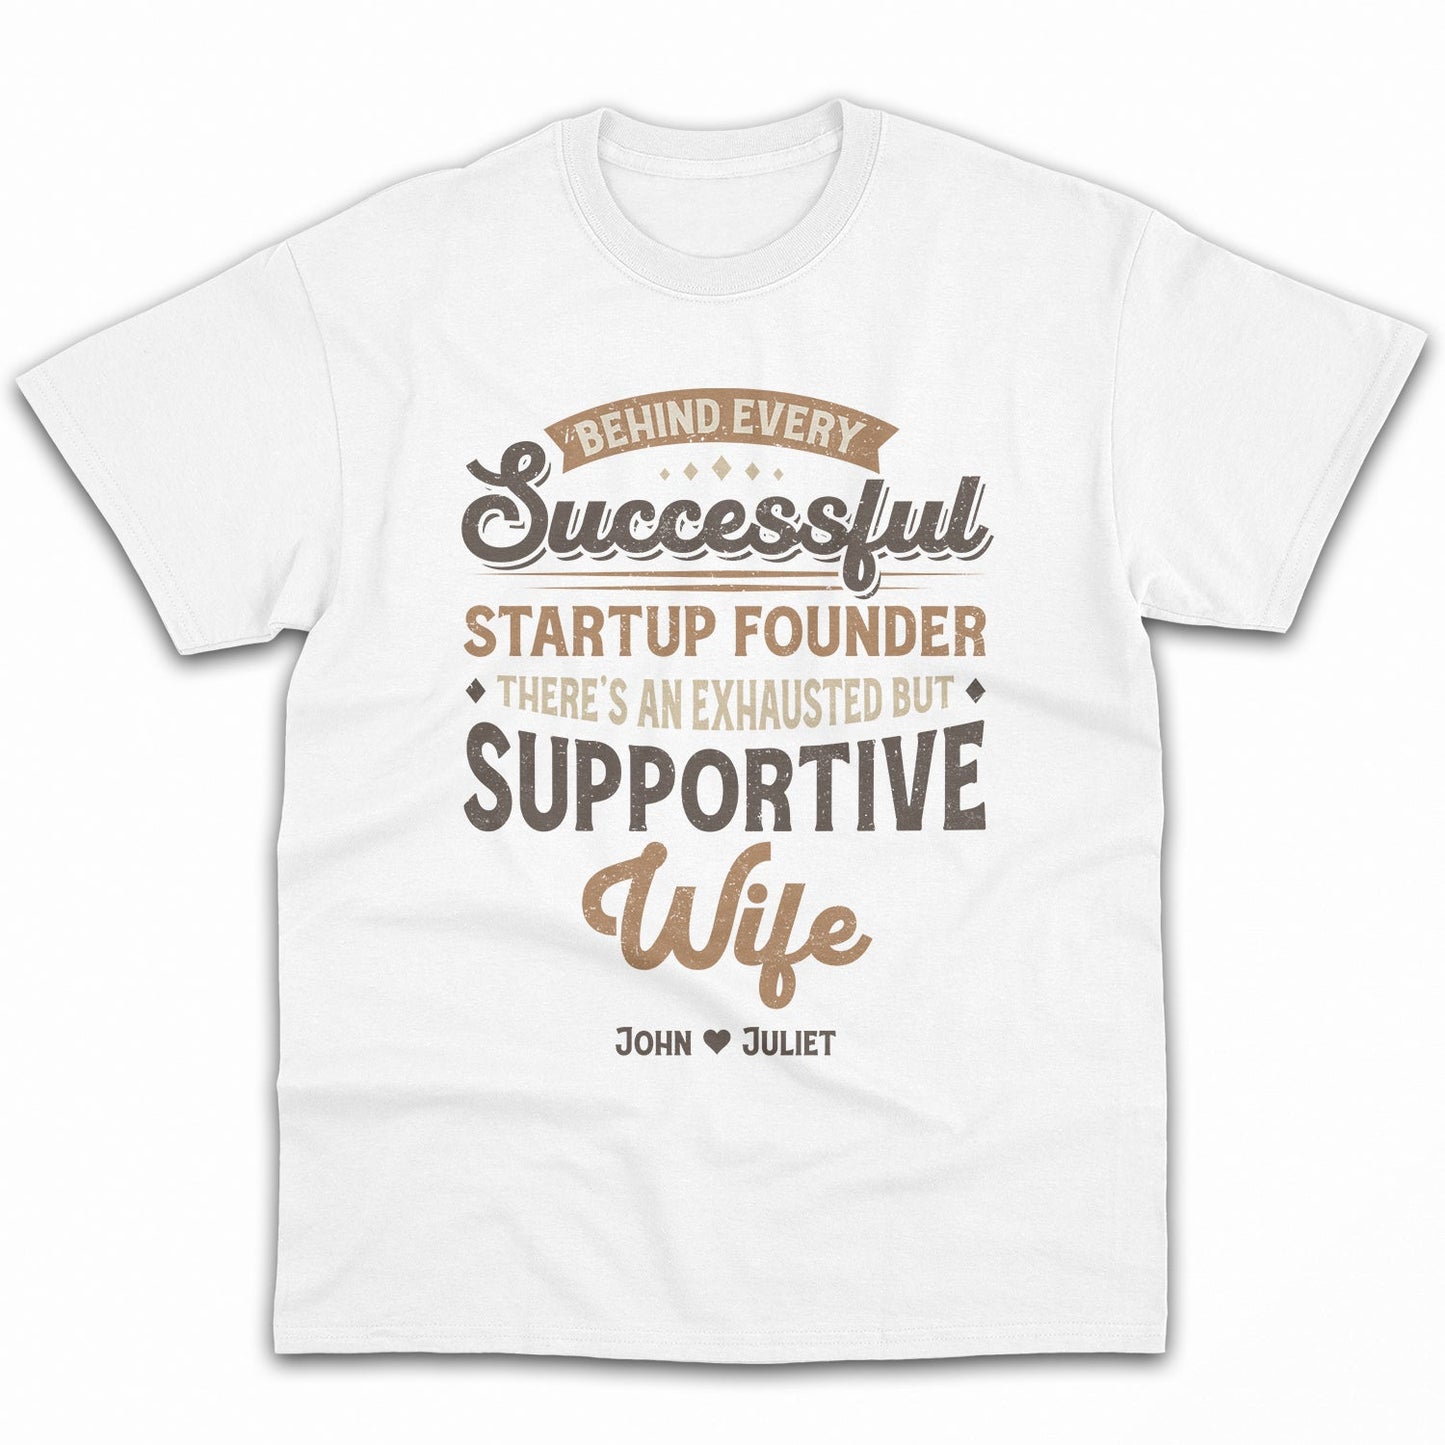 Exhausted But Supportive Wife - Personalized Birthday gift  - Custom Tshirt - MyMindfulGifts